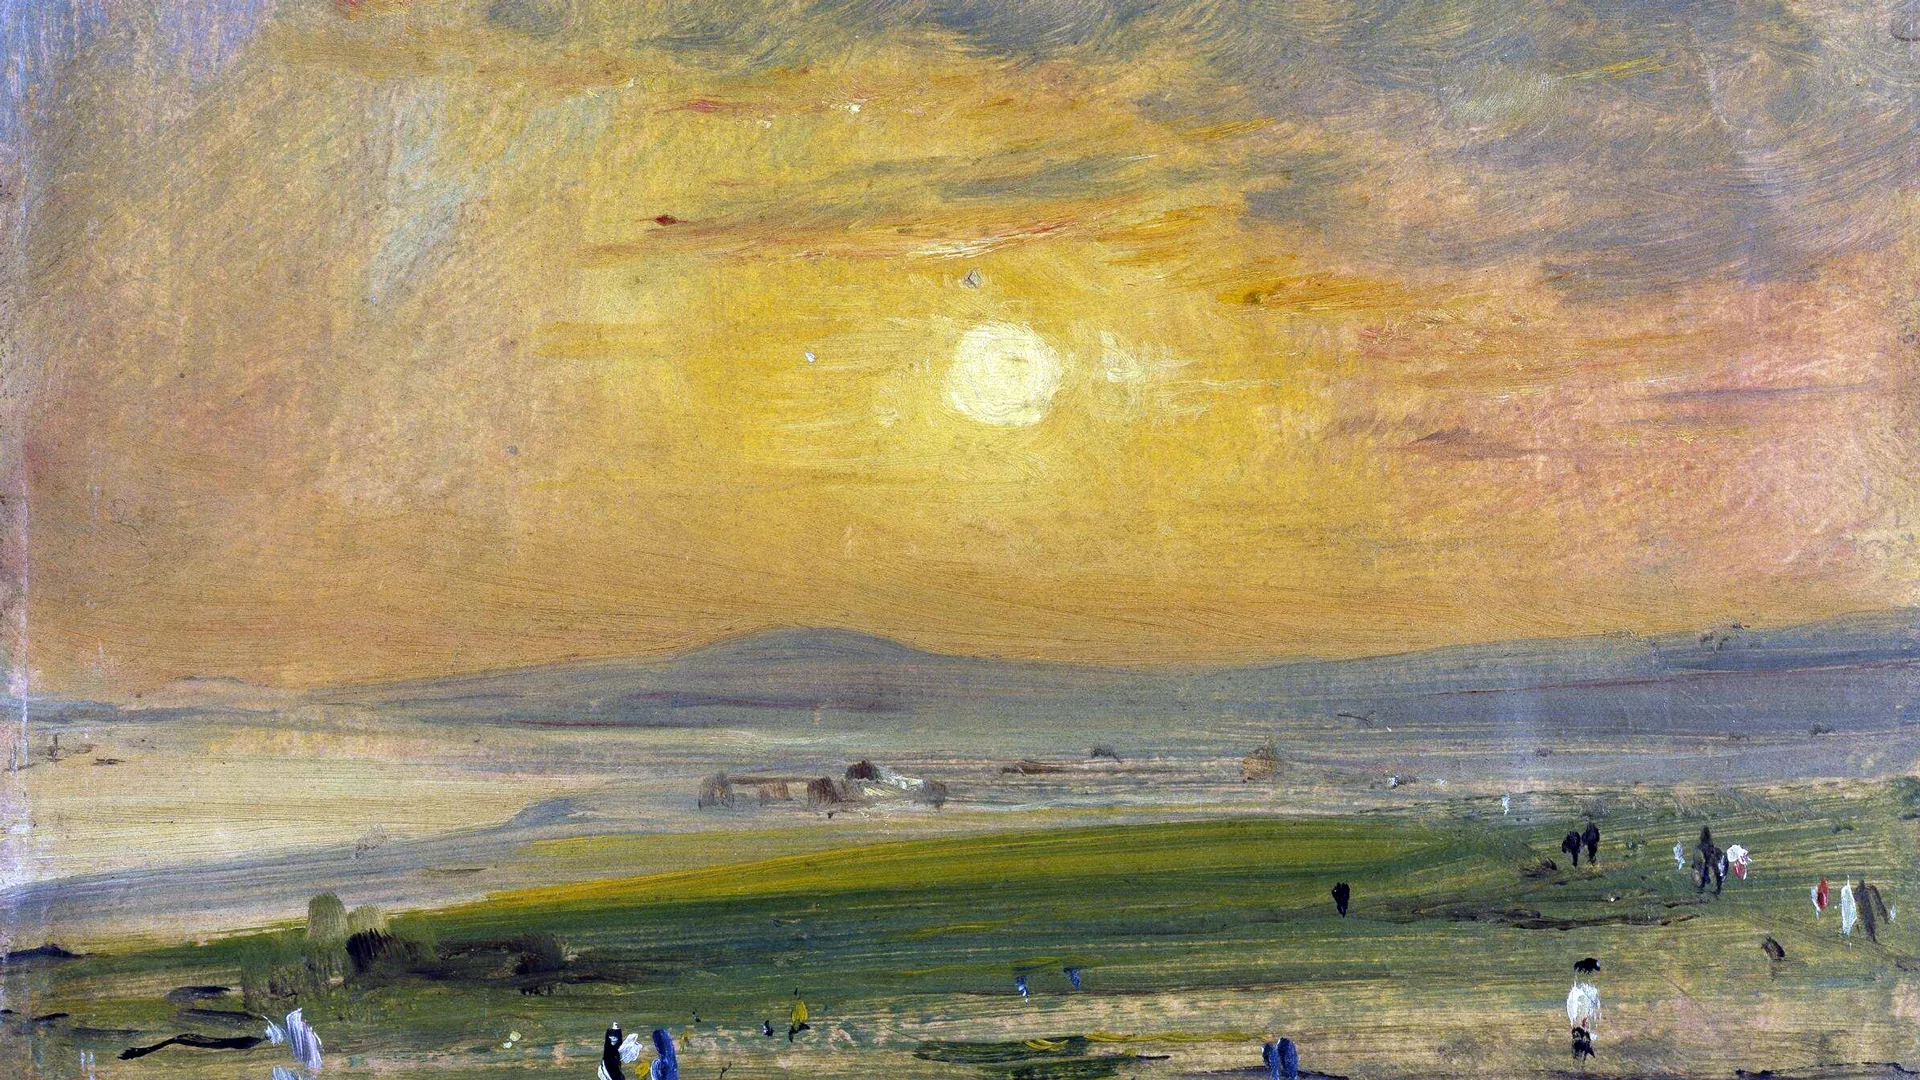 A 19th century painting showing a coastal scene at sunset in Brighton with the sun burning bright as it sets in the sky over the beach and sea.